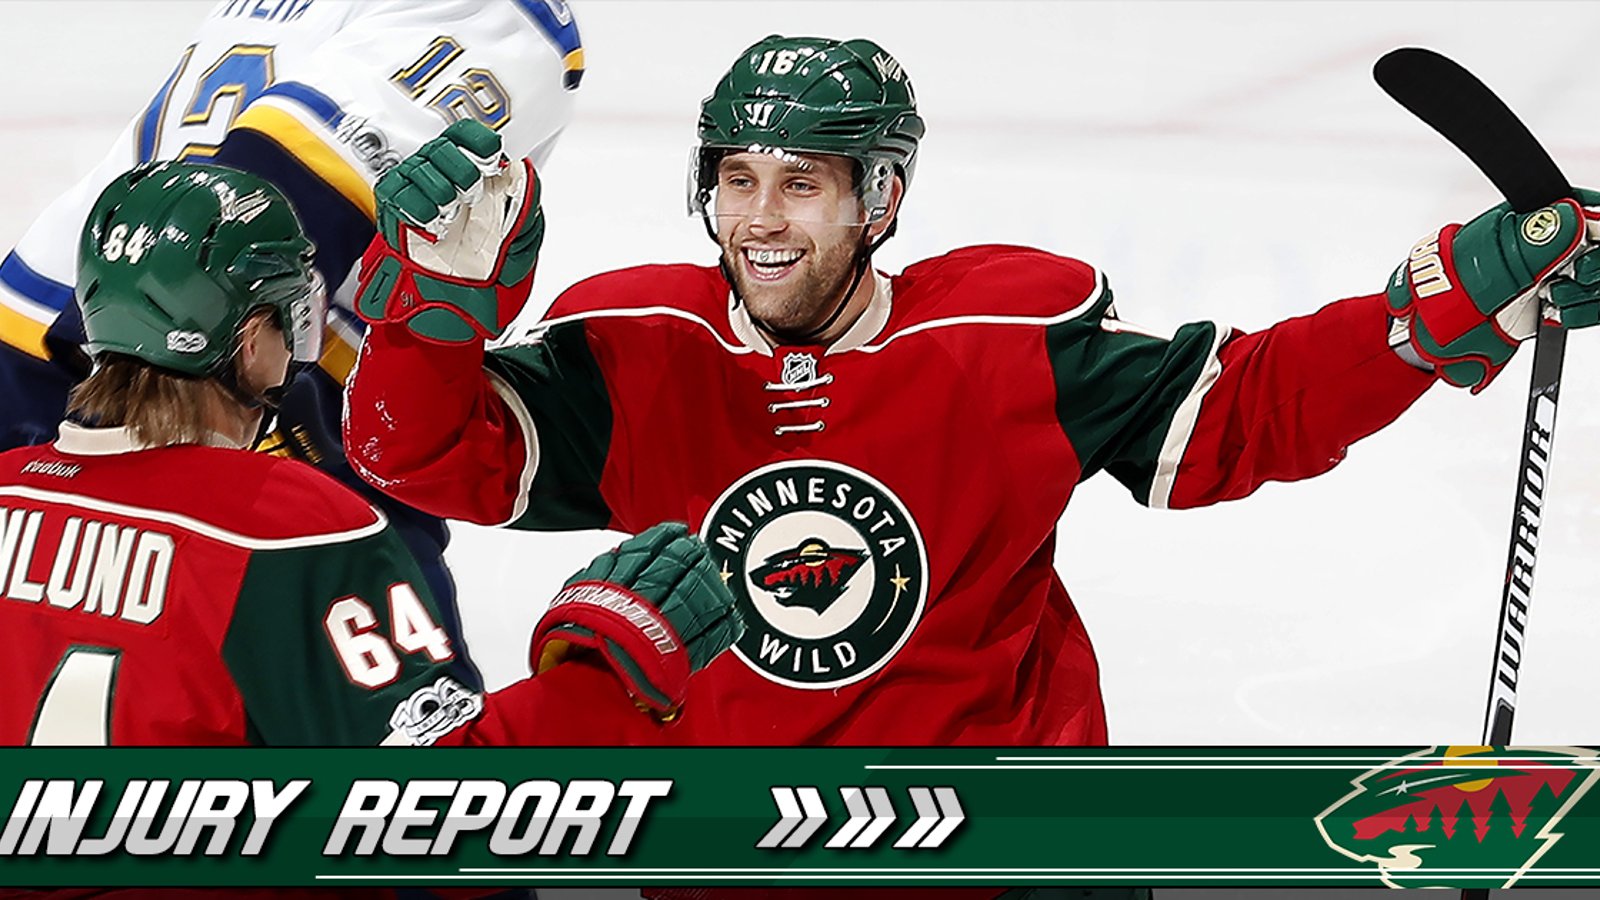 INJURY REPORT: Wild forward goes under the knife